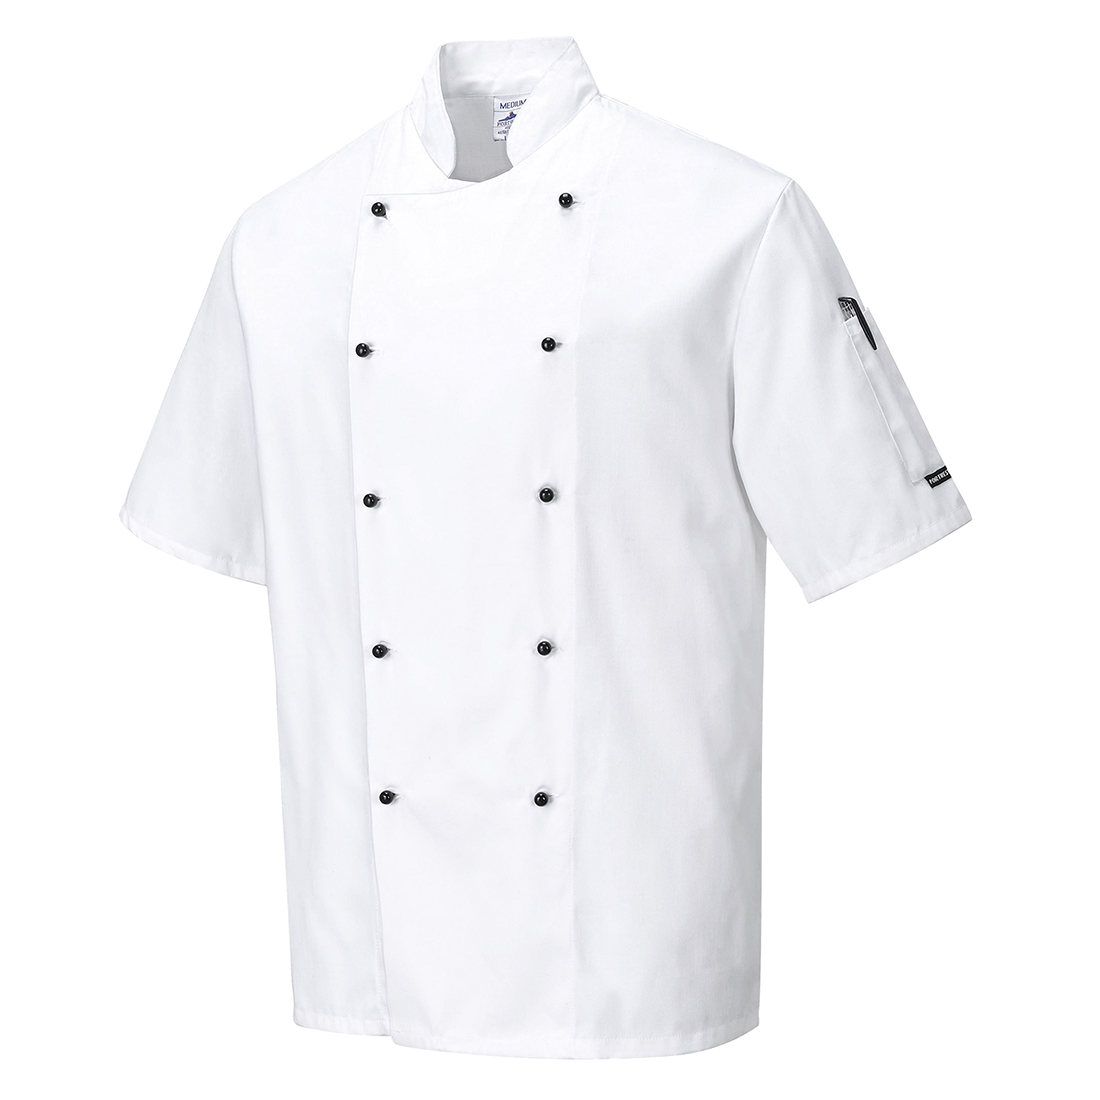 elevate chef safety-wear available